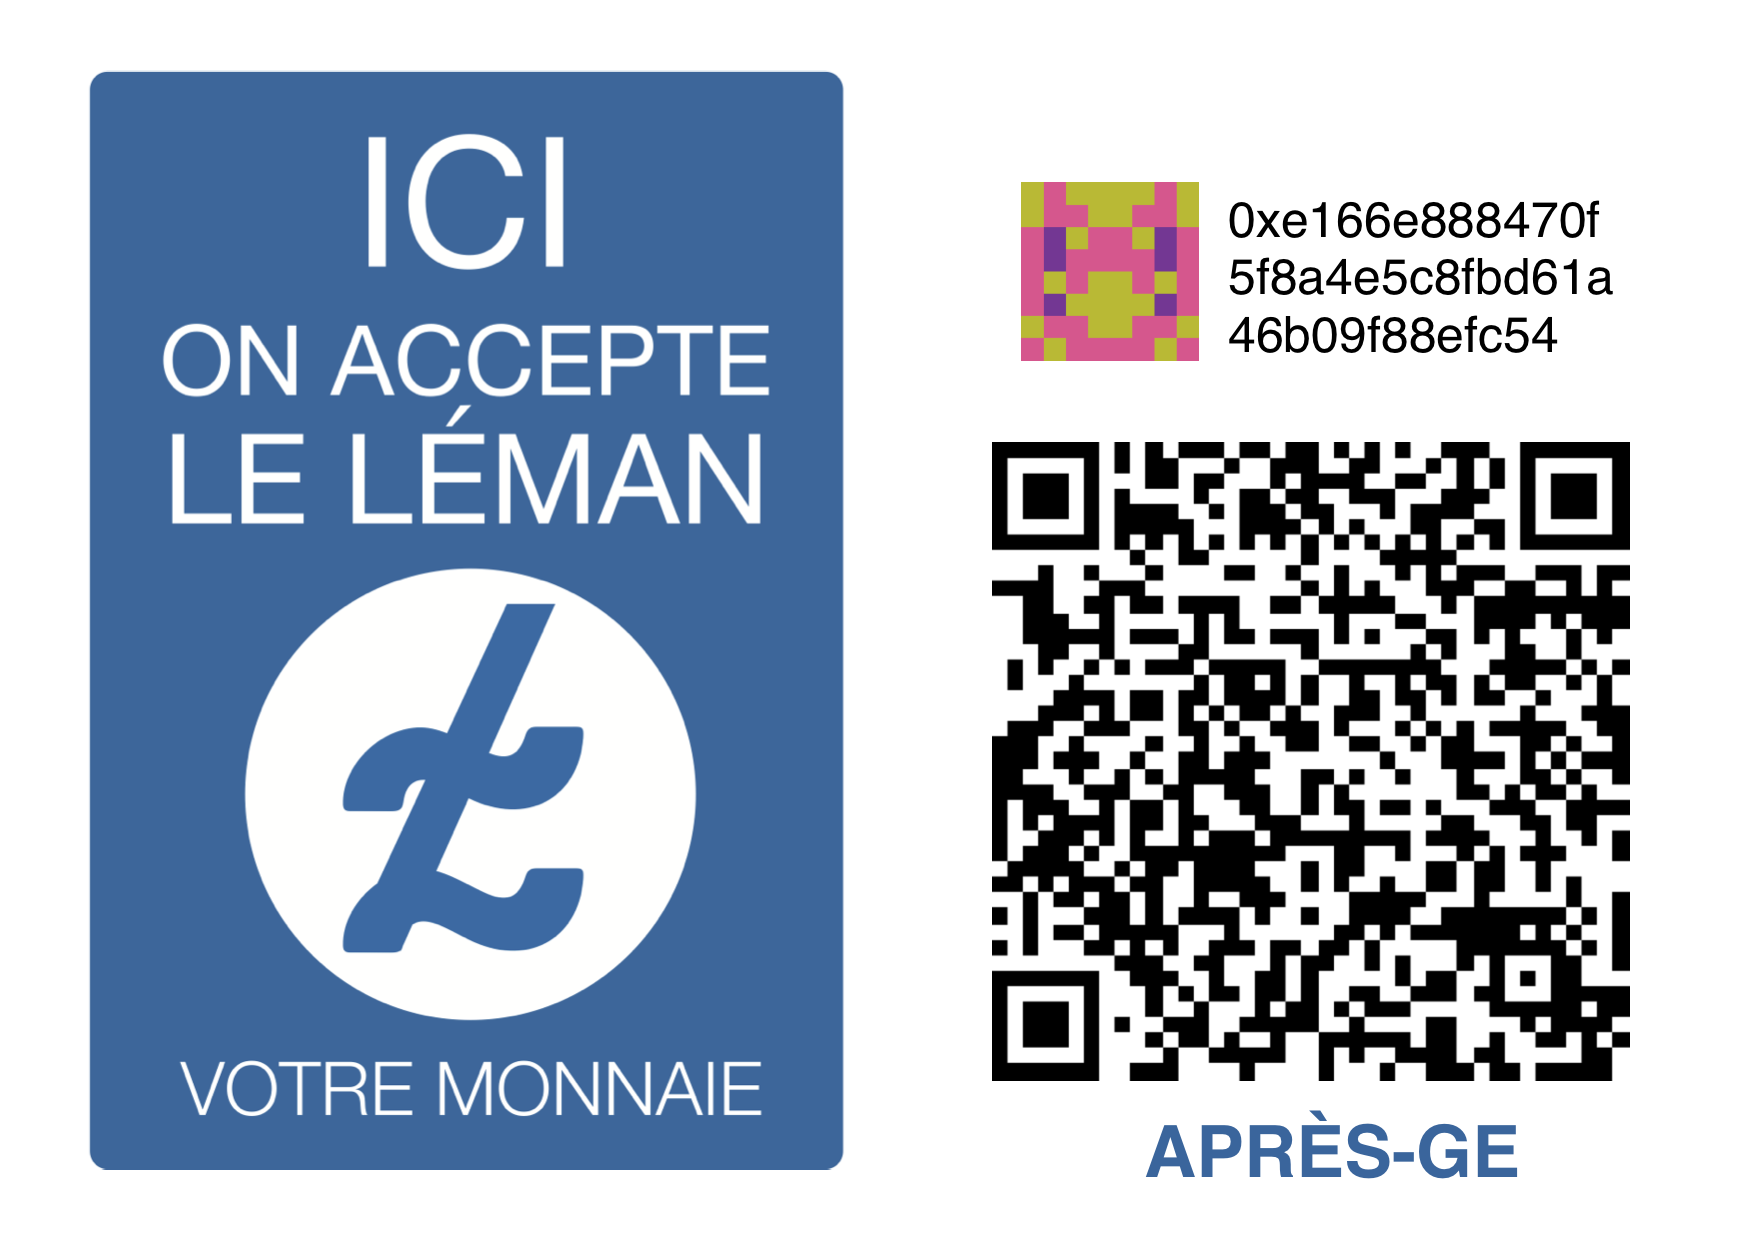 E-leman: a local blockchain currency in Switzerland and beyond